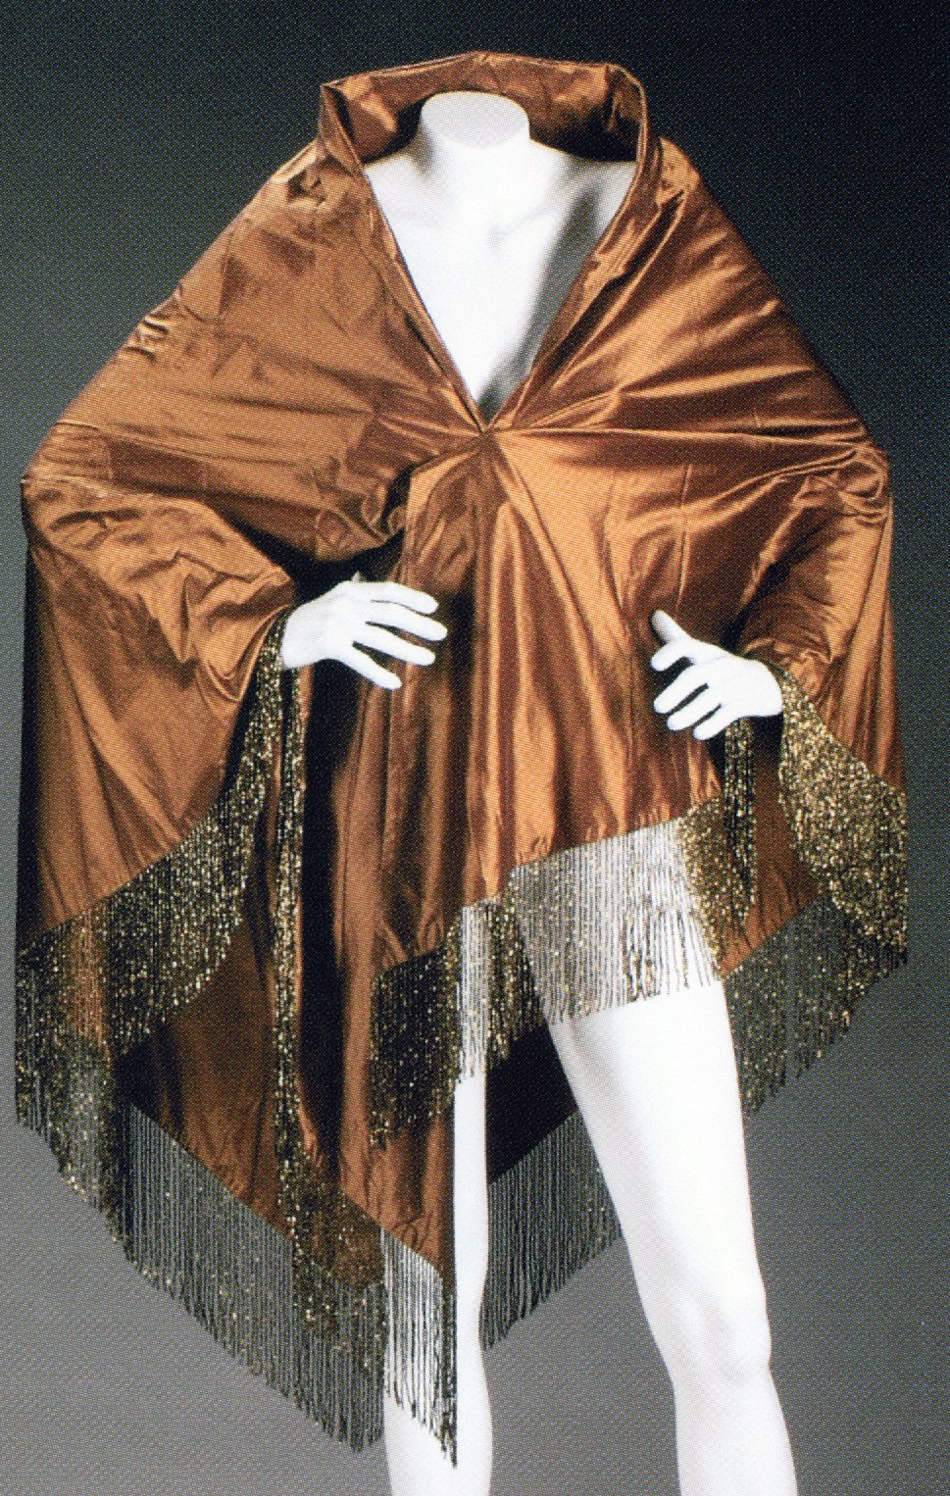 Copper-colored shawl that Streisand wore in Los Angeles.